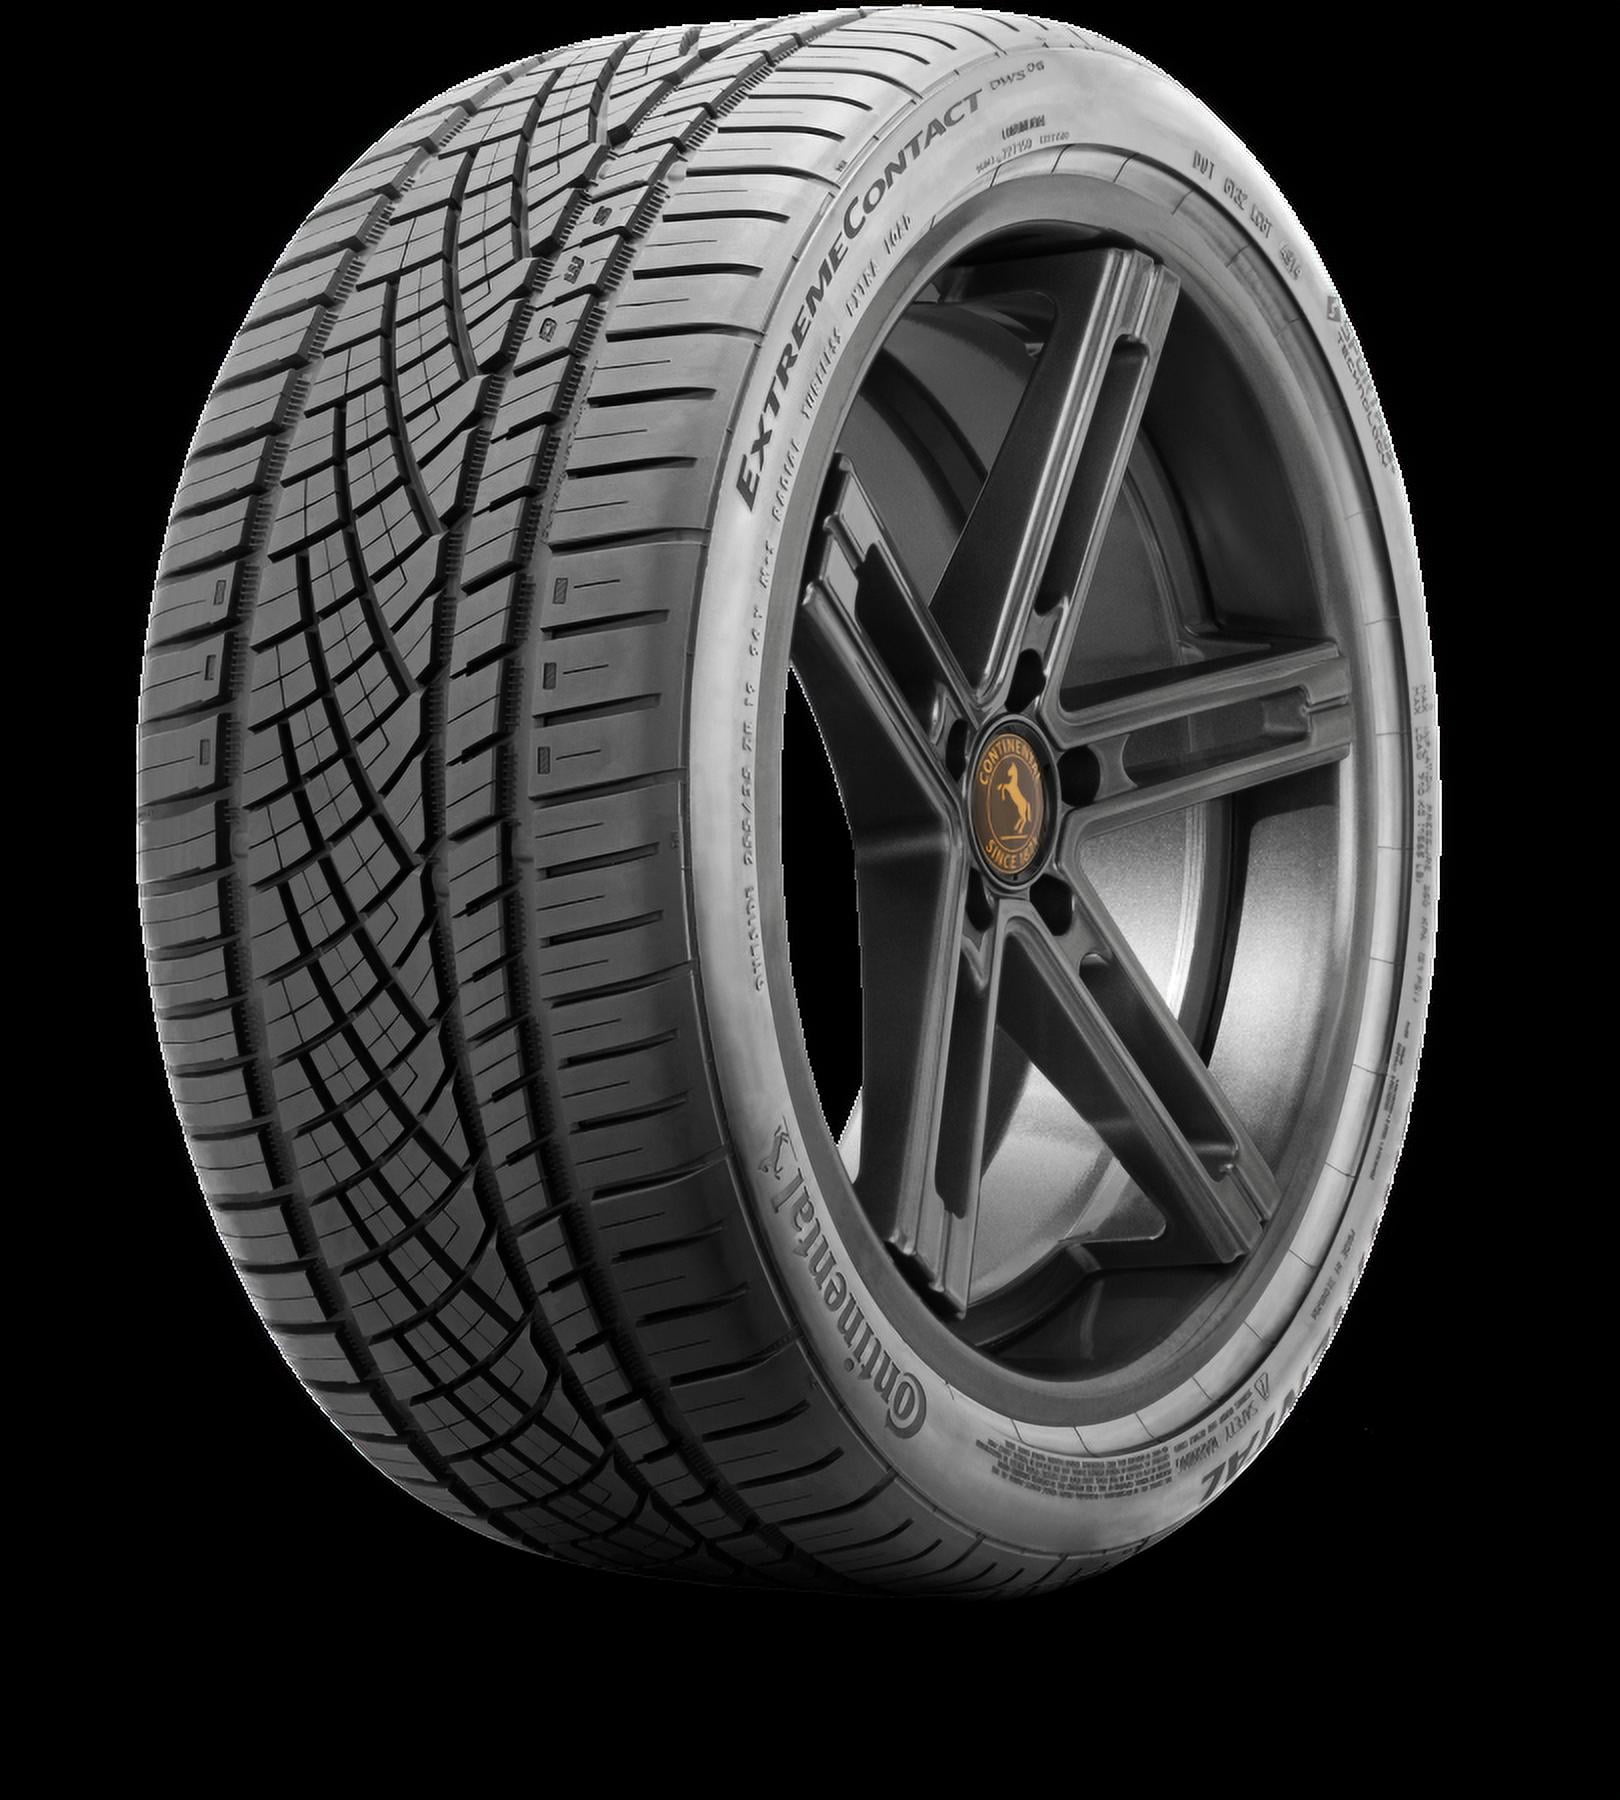 Continental ExtremeContact DWS06 265/40R22 106 W Tire